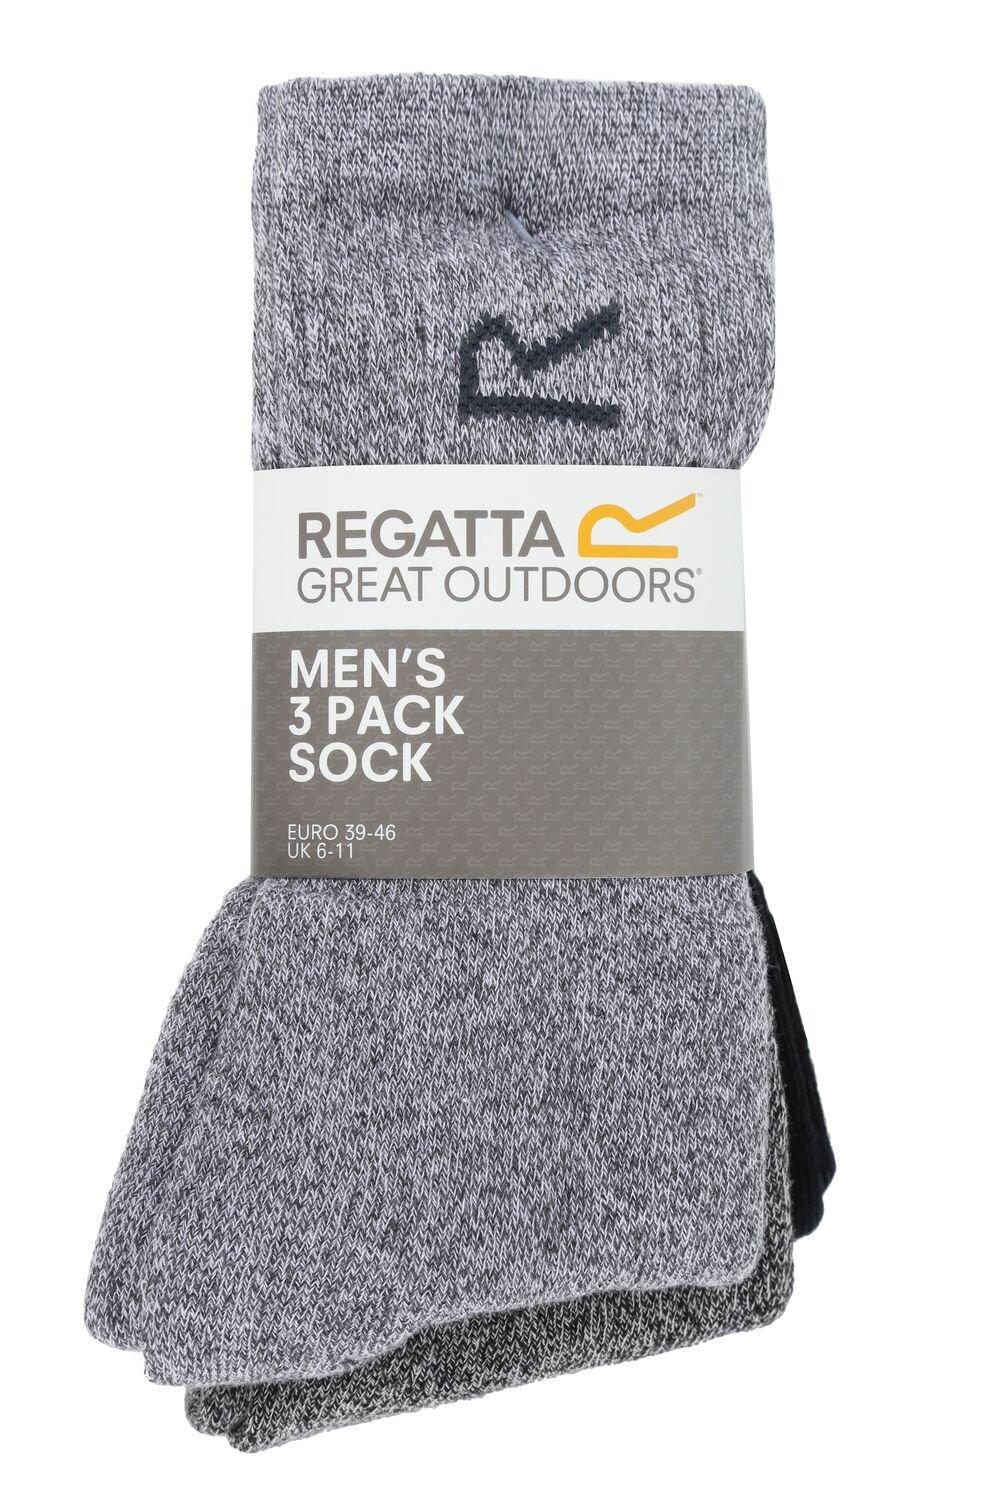 '3-Pack' Cotton-Blend Socks in a Box